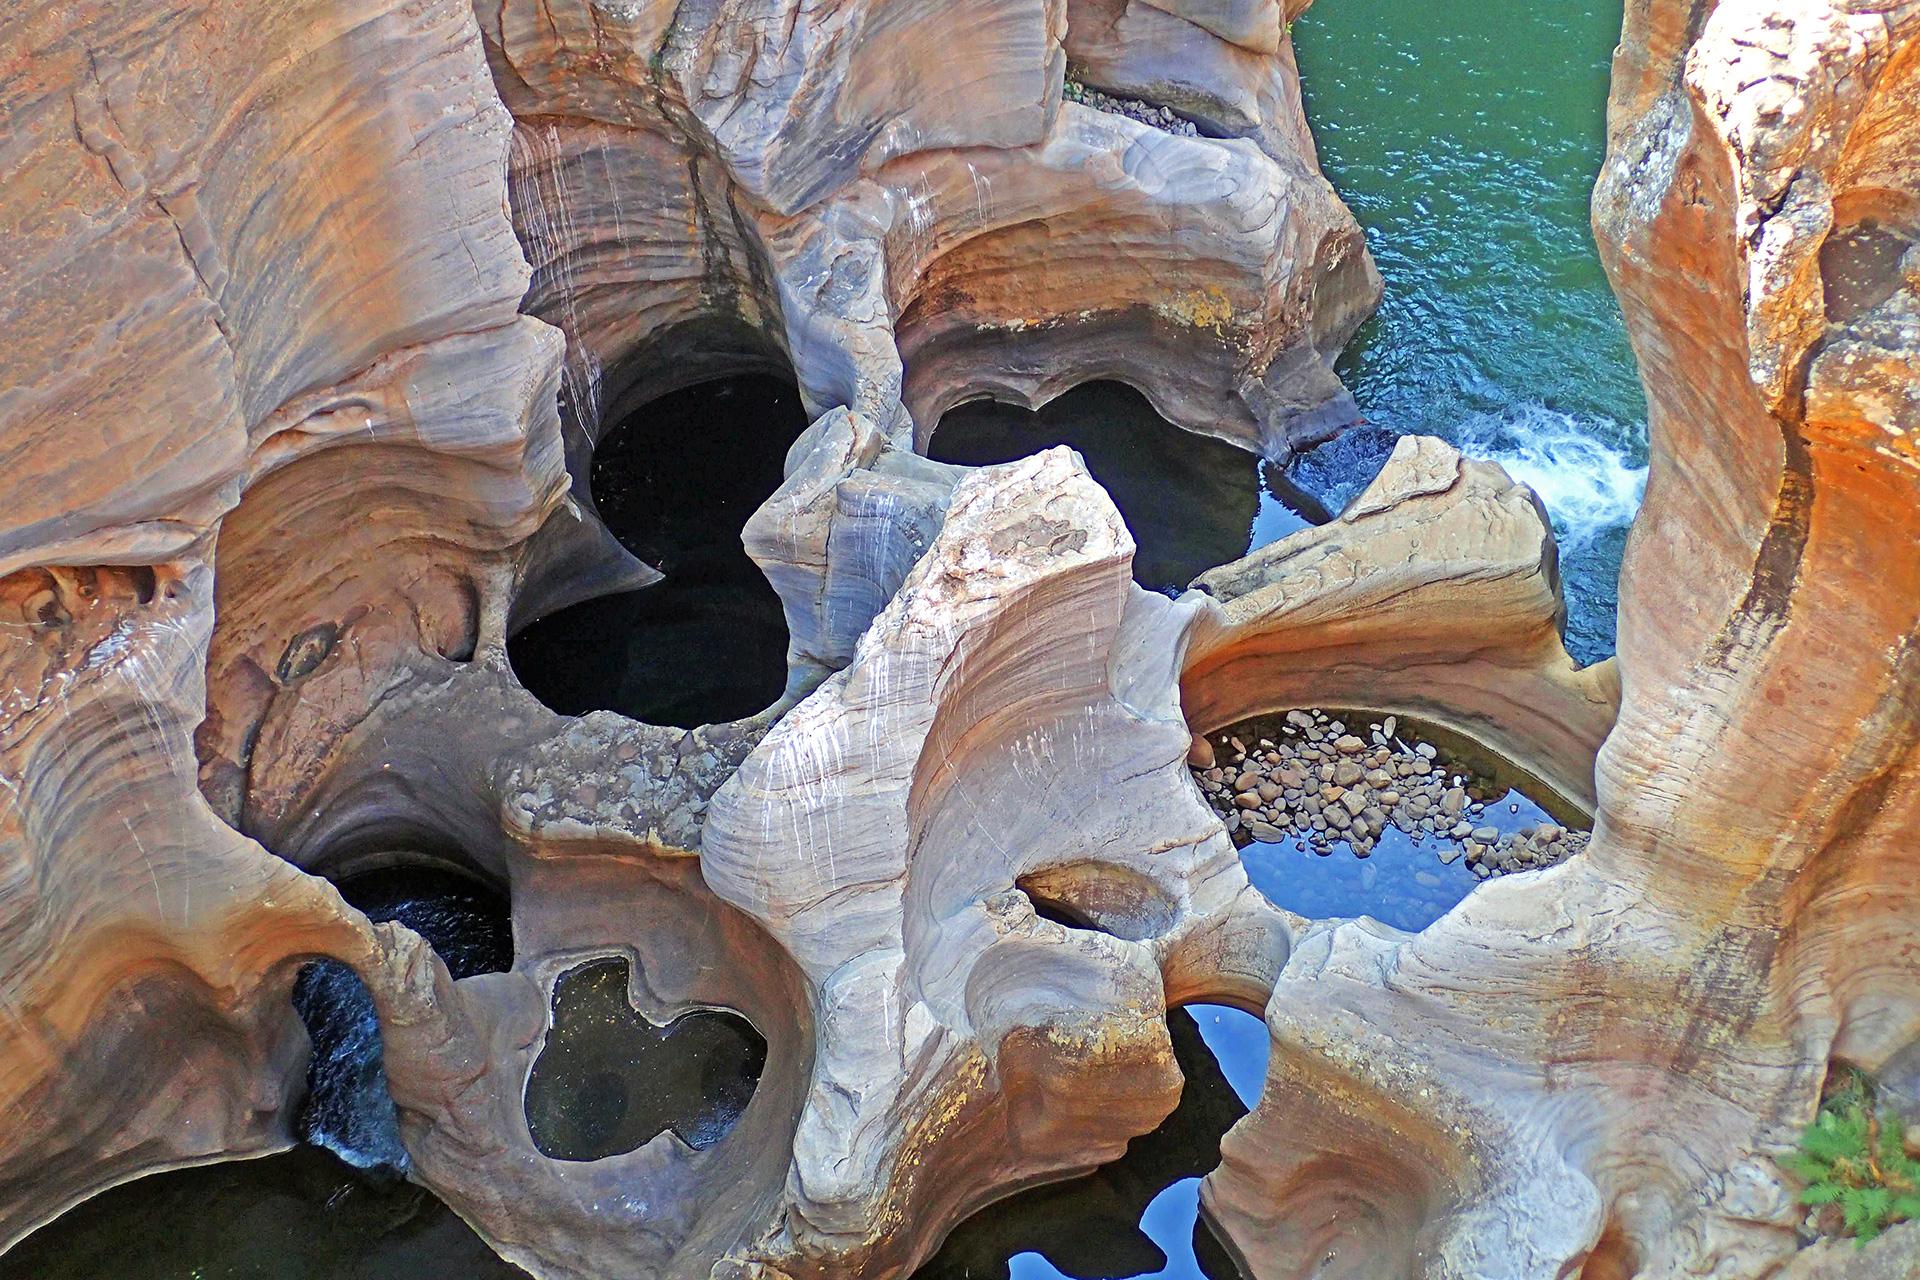 Bourke's Luck giant potholes in South Africa 